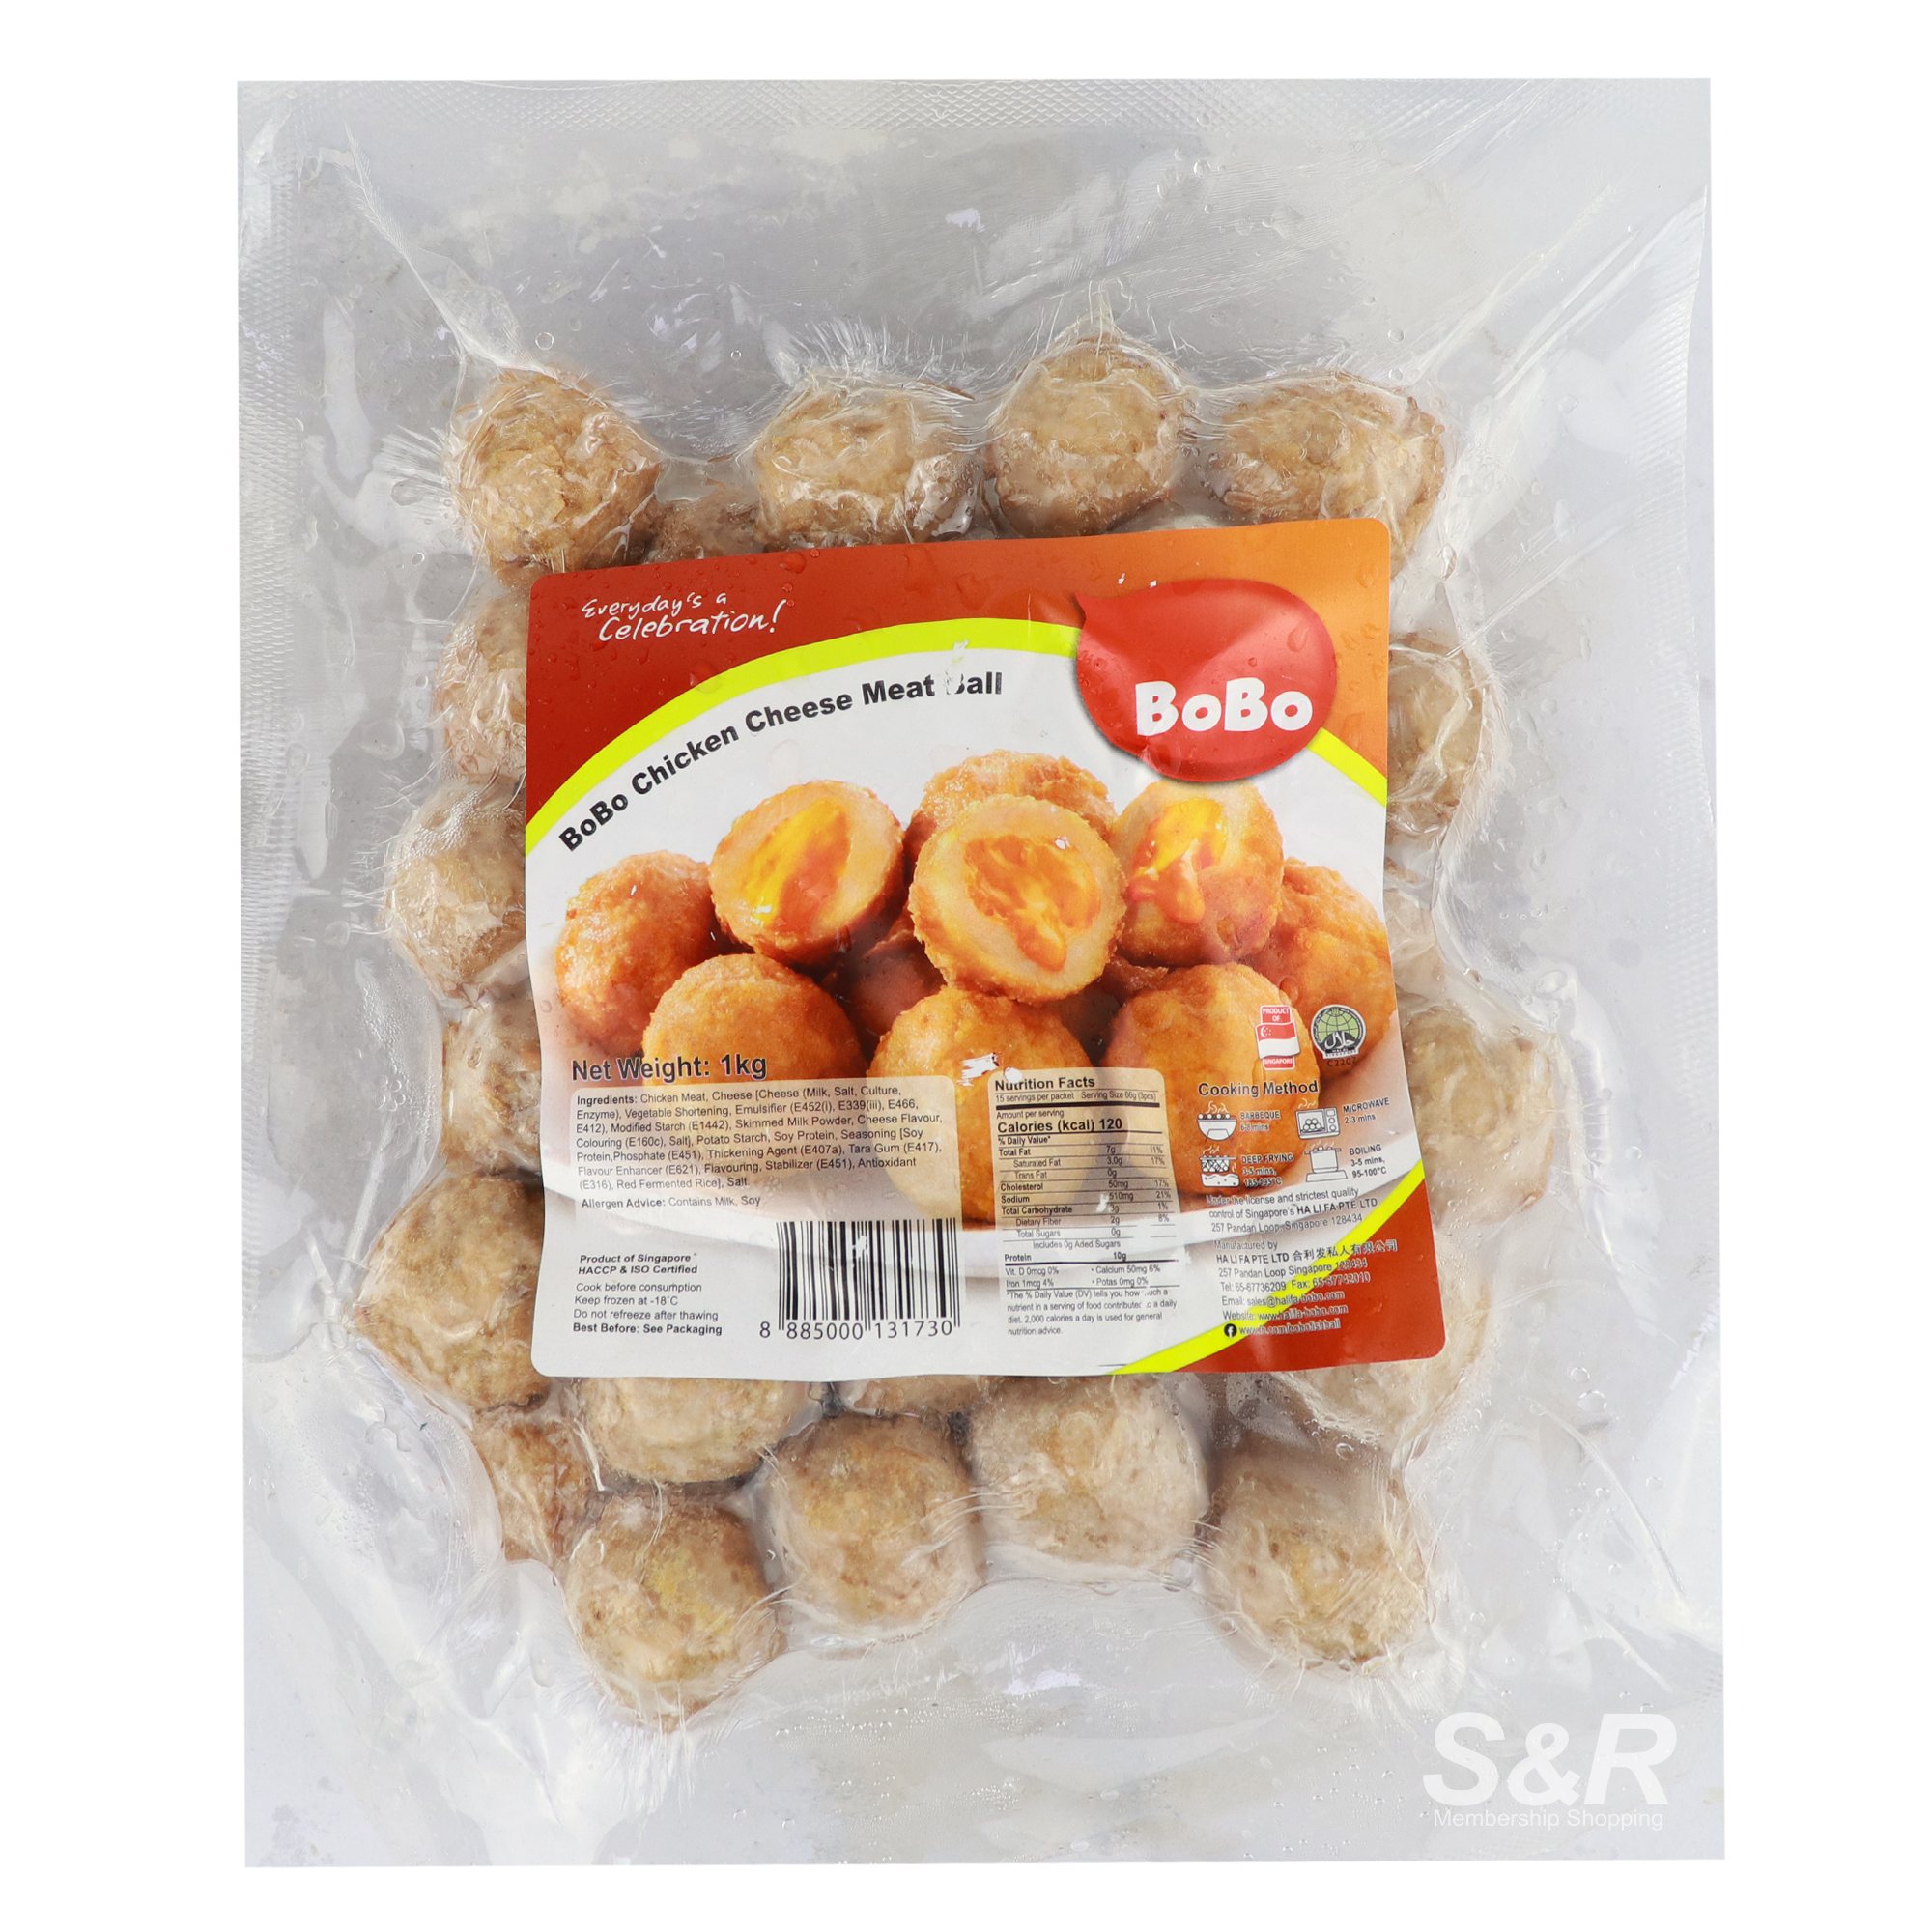 Bobo Chicken Cheese Meat Ball 1kg